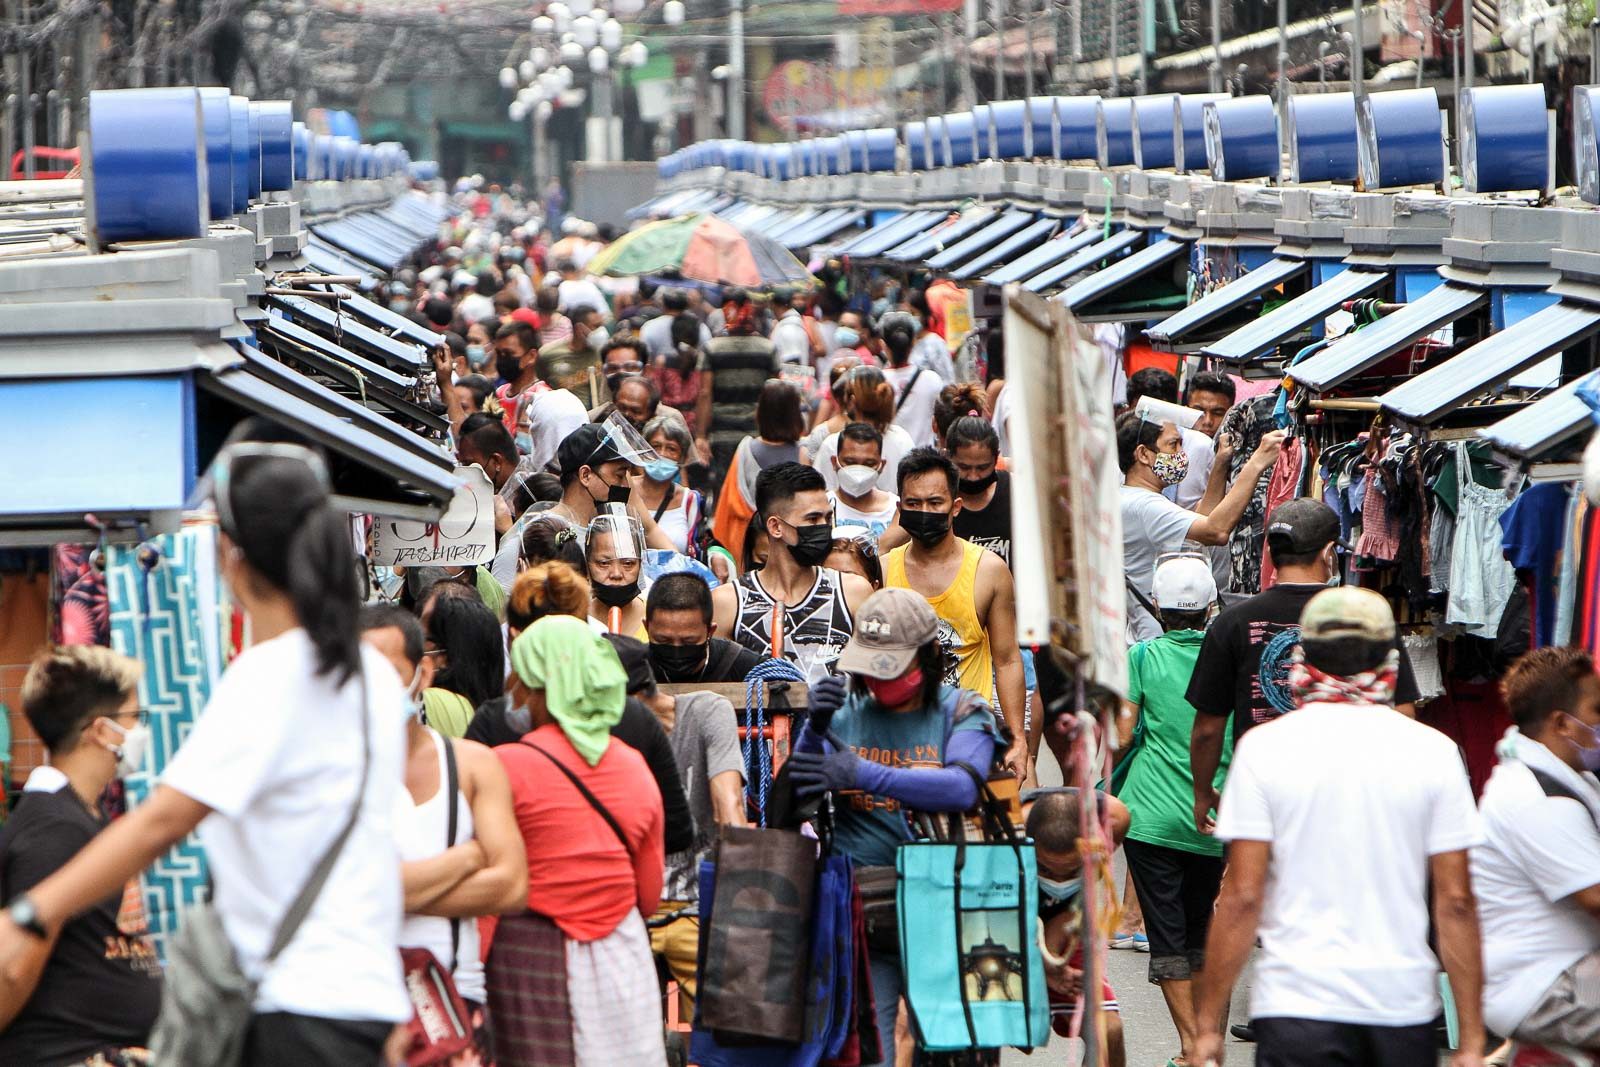 Philippines posts all-time high of daily COVID-19 cases at 22,820